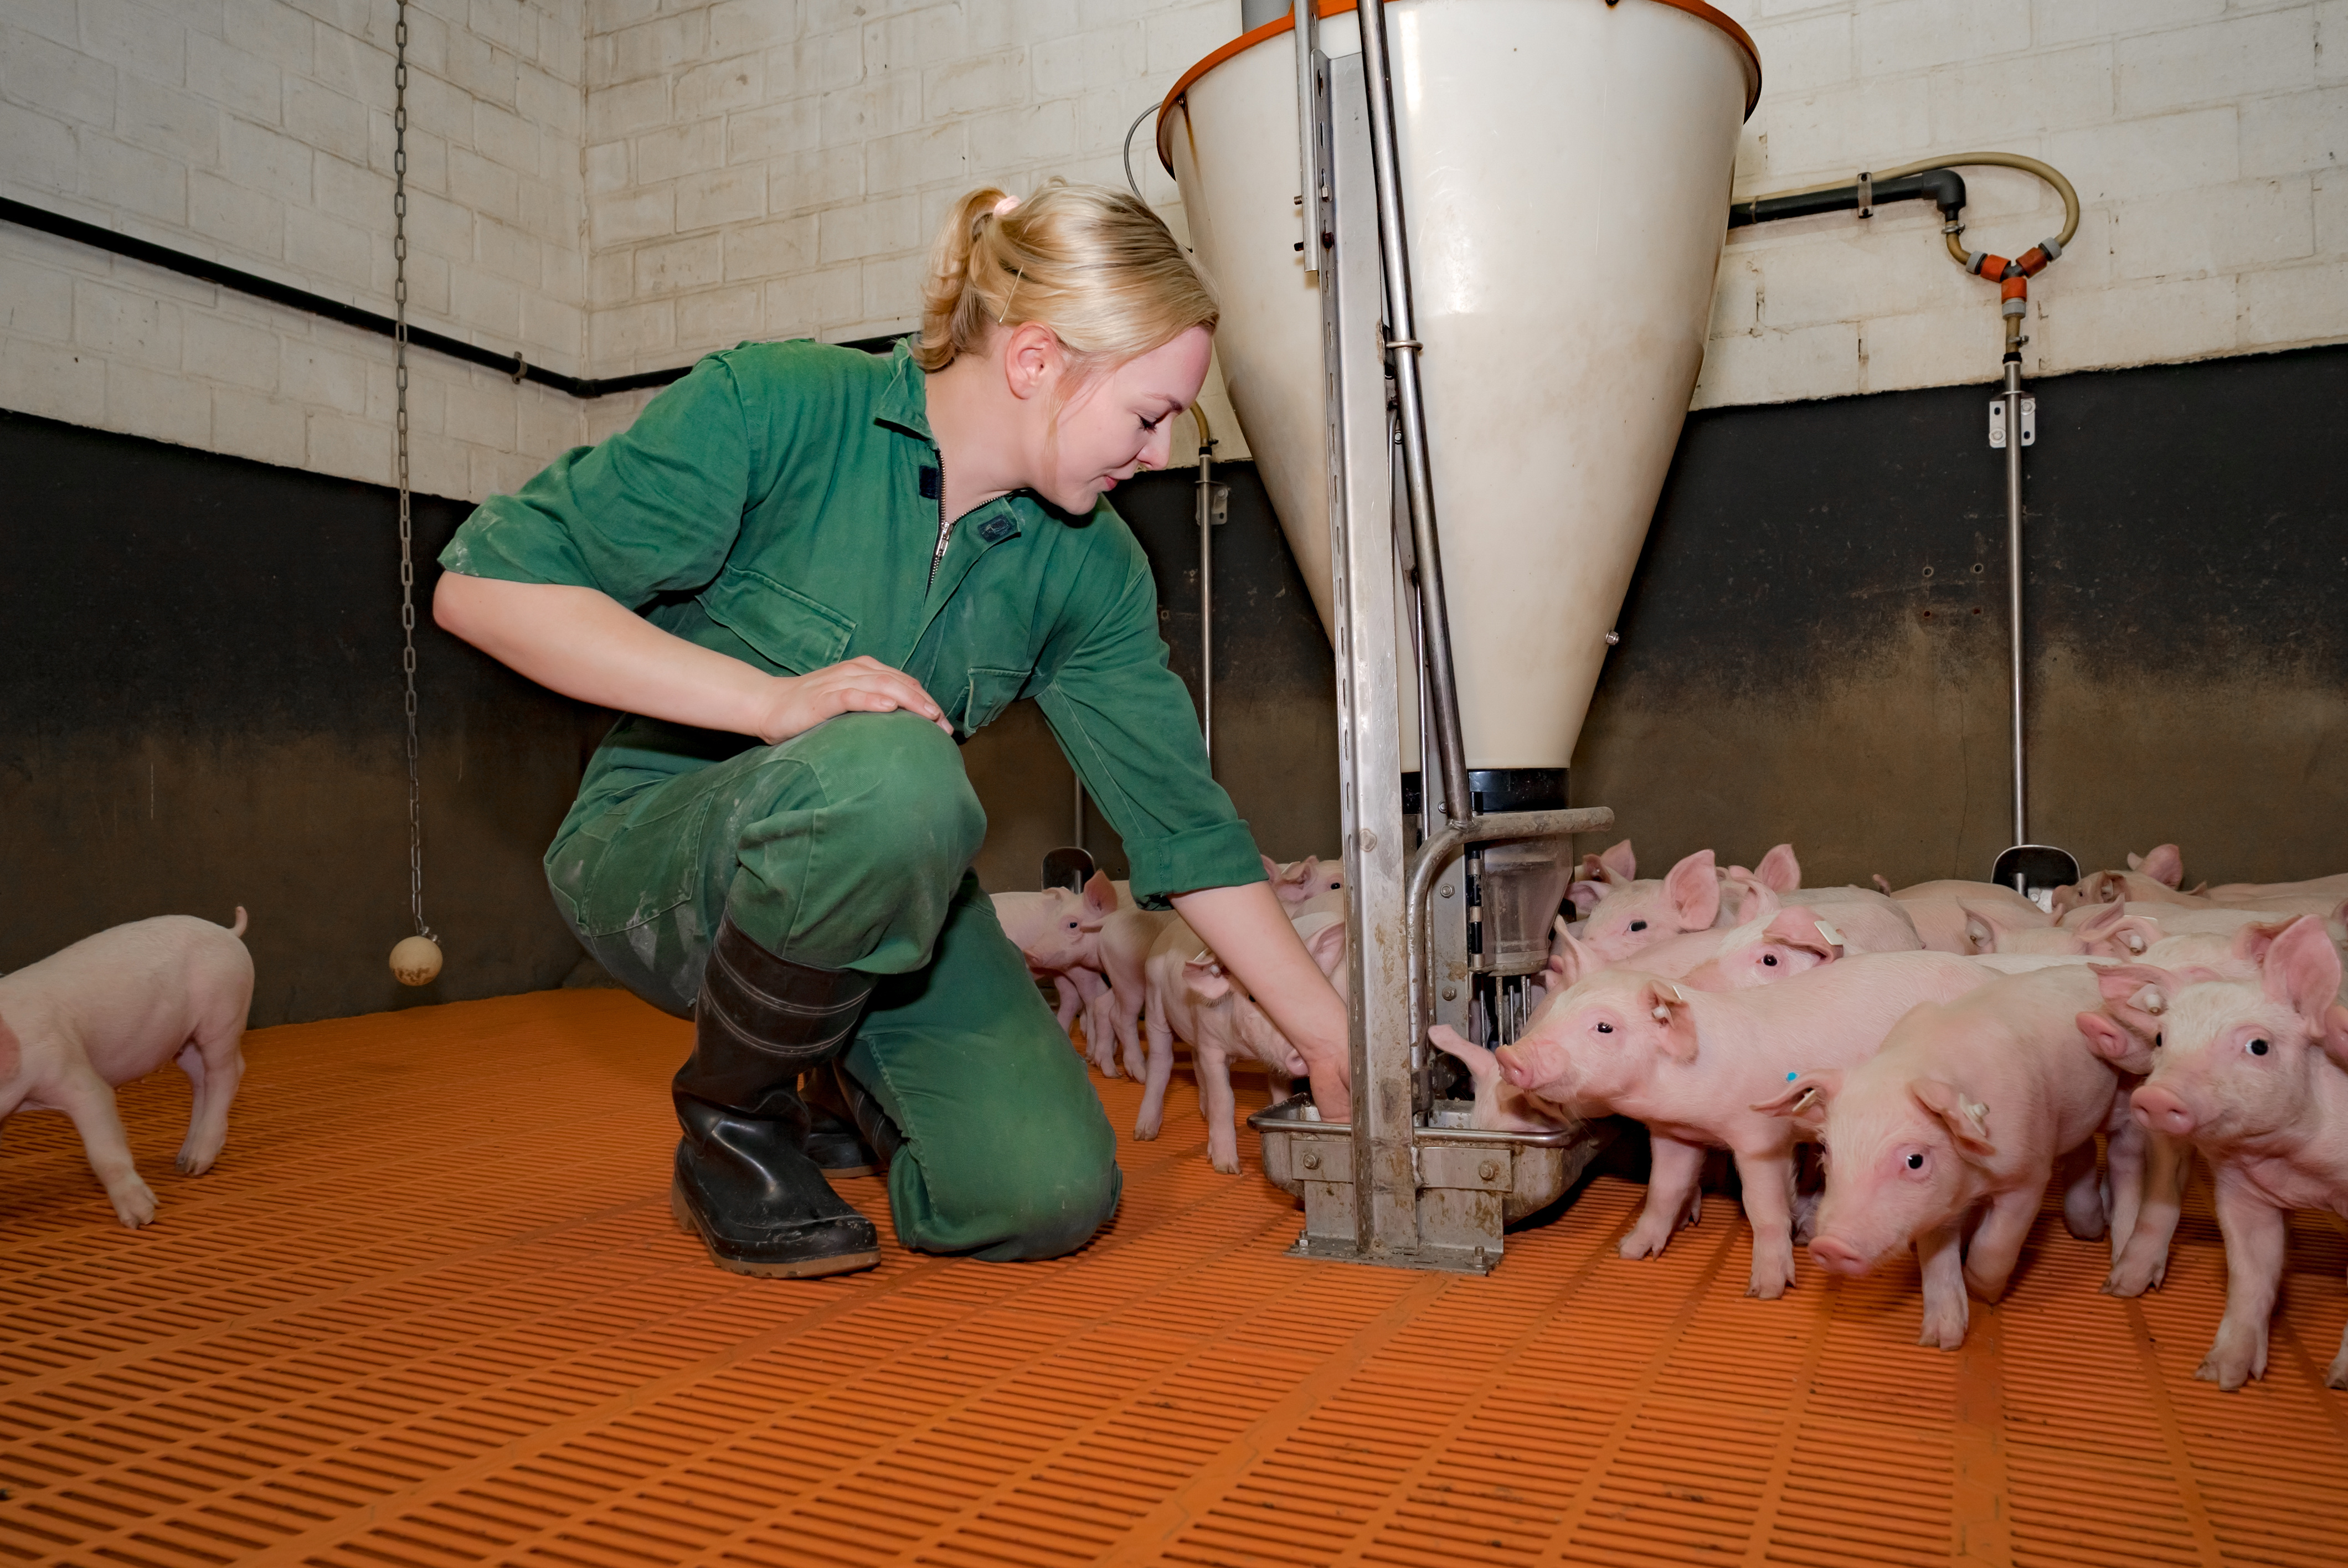 Top producers will focus on providing fresh feed and stimulating feed intake